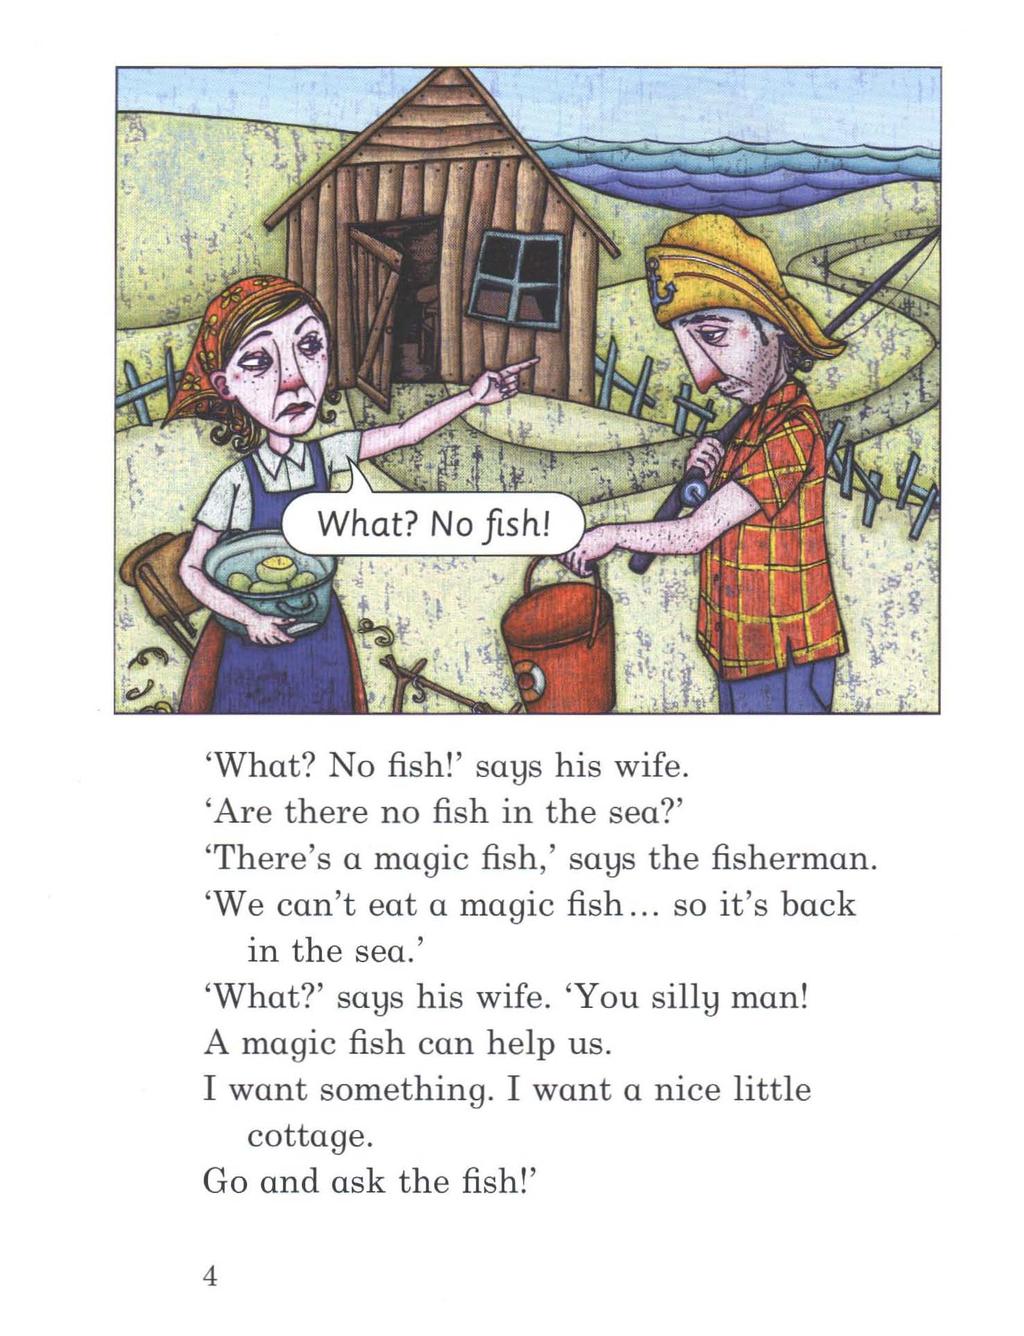 'What? No fish!' sa1:js his wife. 'Are there no fish in the sea?' 'There's a magic fish,' sa1:js the fisherman. 'We can't eat a magic fish.